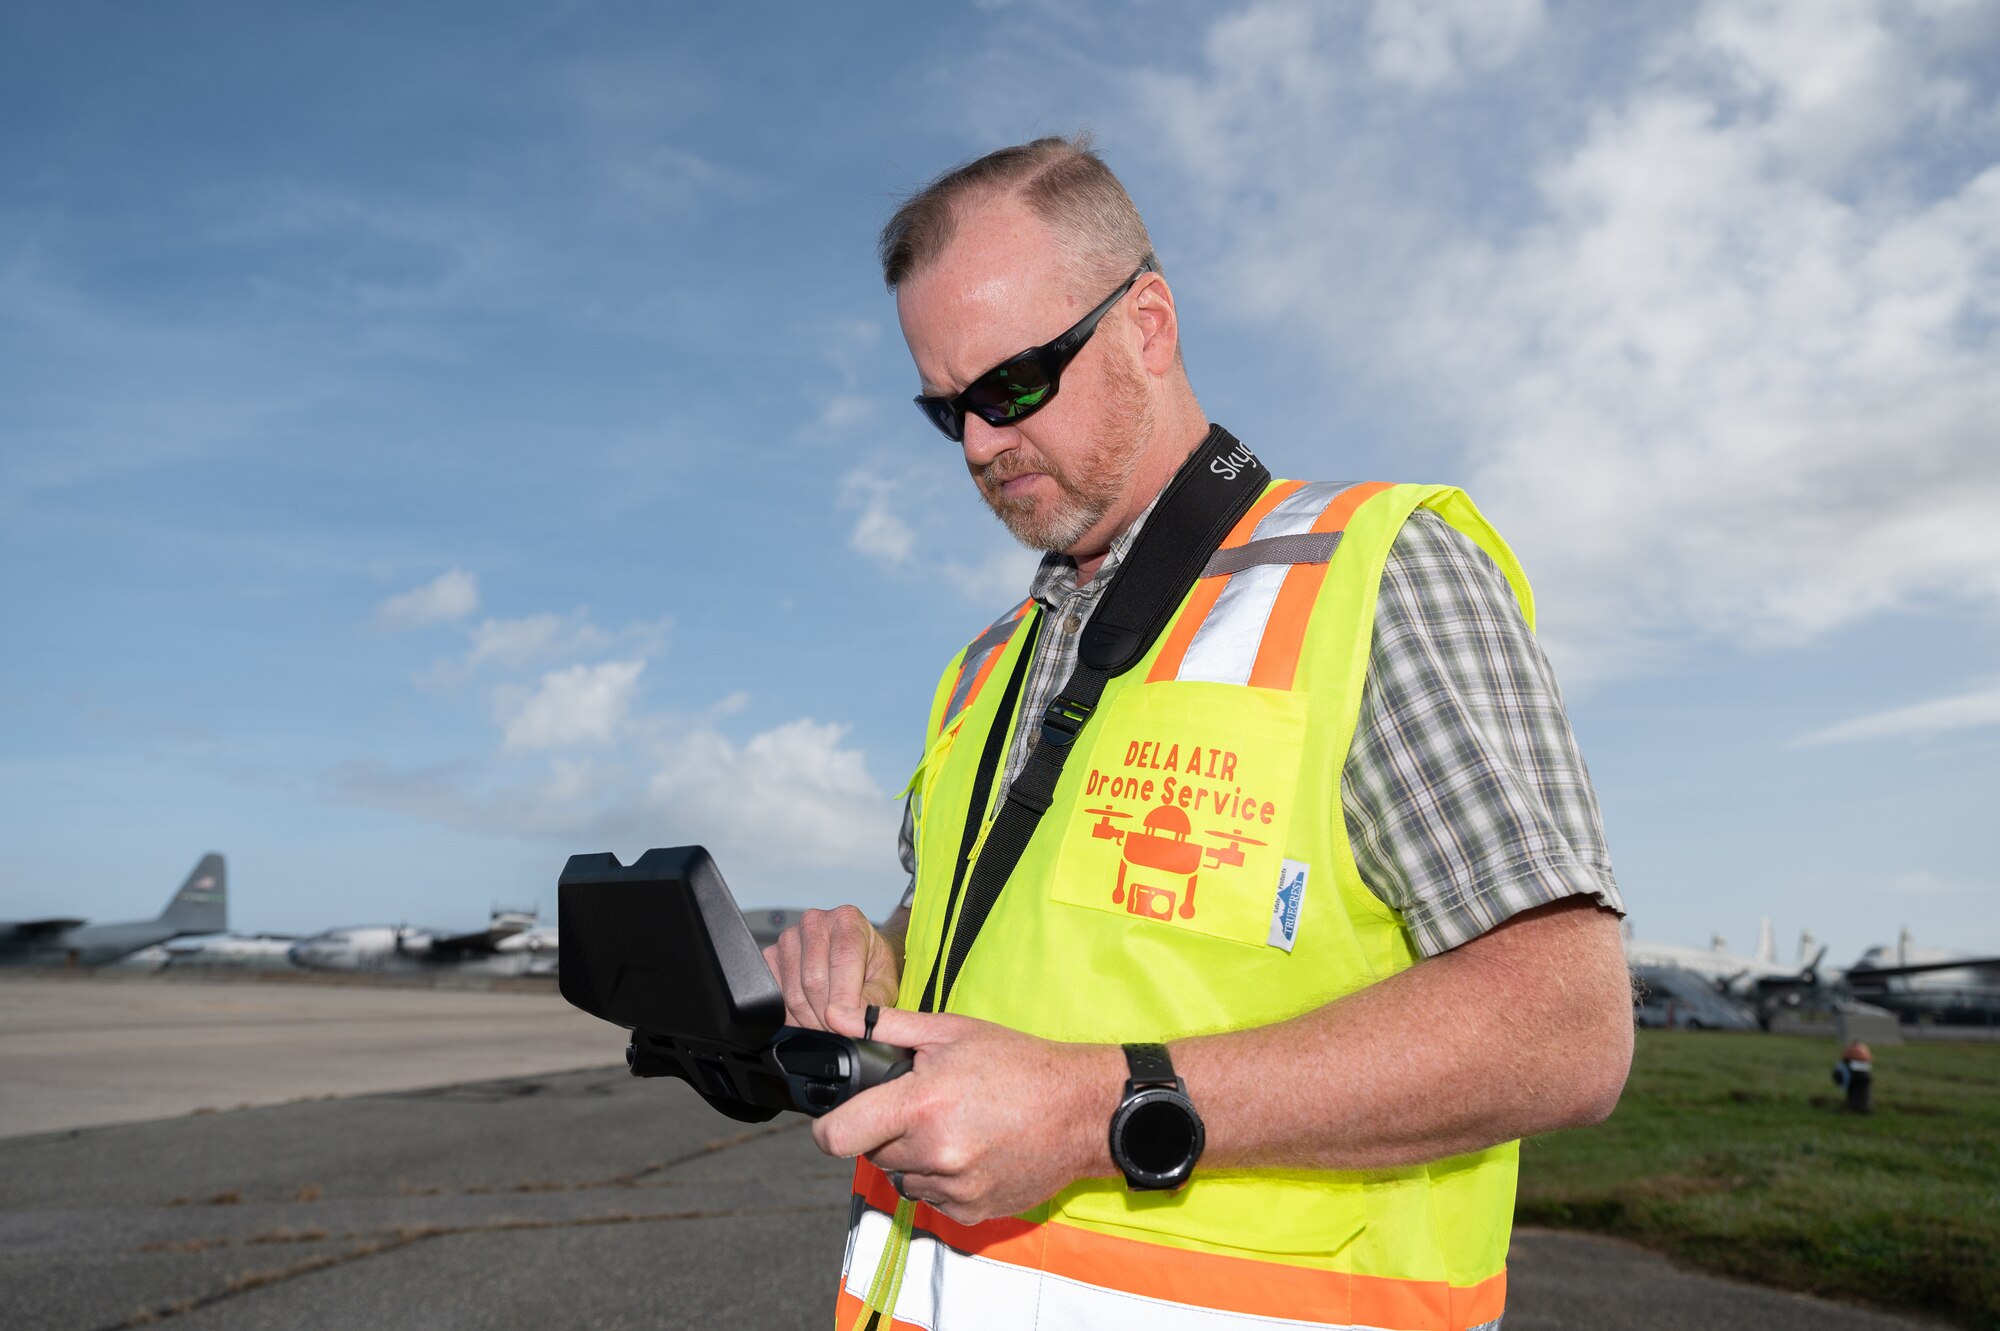 Ken Jones, 436th Mission Generation Group continuous process improvement manager, prepares a Skydio X2D drone for takeoff, at Dover Air Force Base, Delaware, Nov. 4, 2022. This flight marked the first drone inspection of the structural integrity of a Dover AFB aircraft. (U.S. Air Force photo by Mauricio Campino)